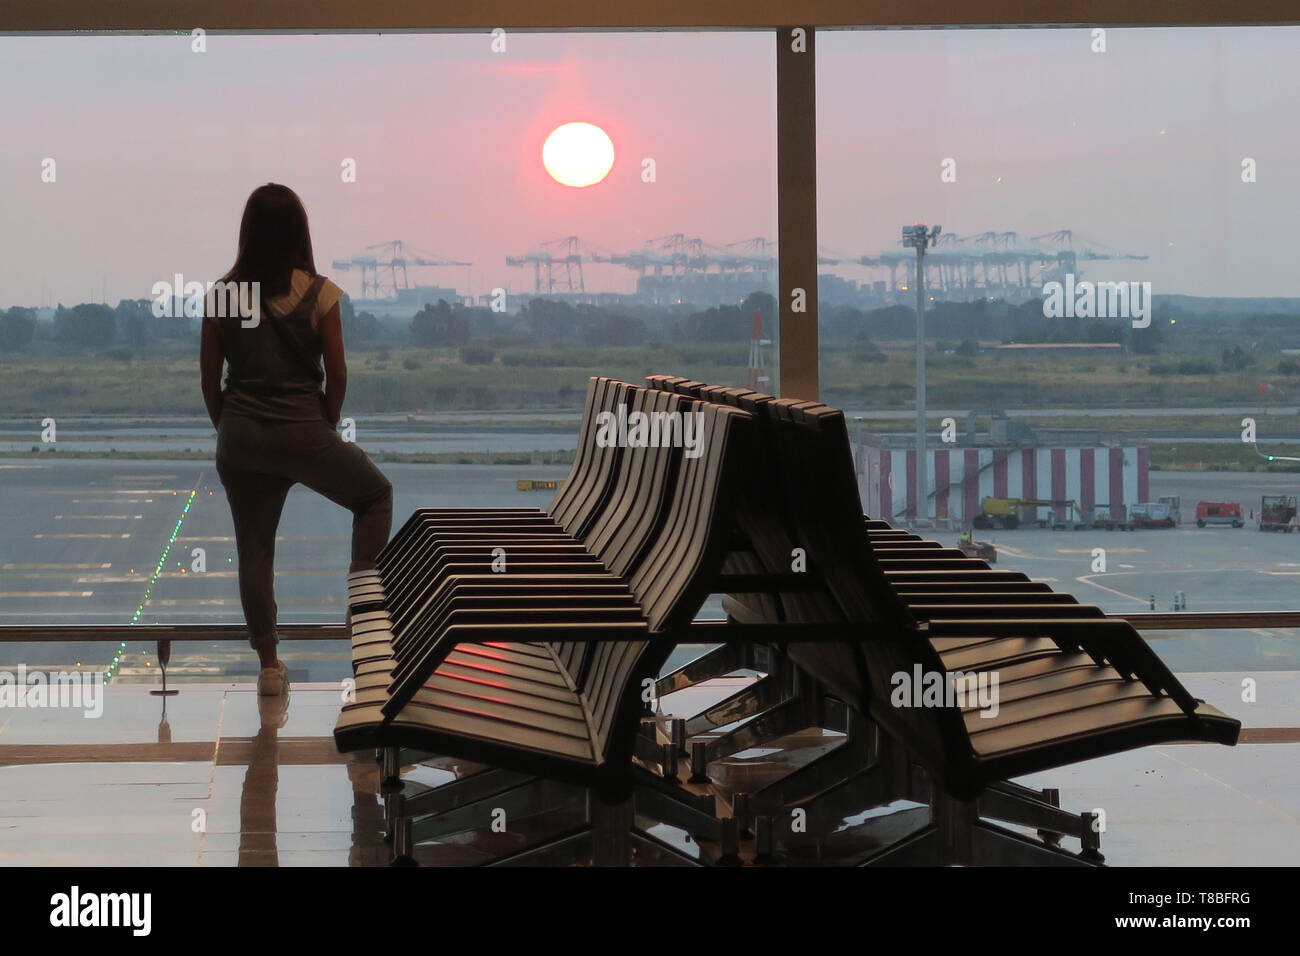 Girl contemplating the sunrise at a gate at the airport Stock Photo